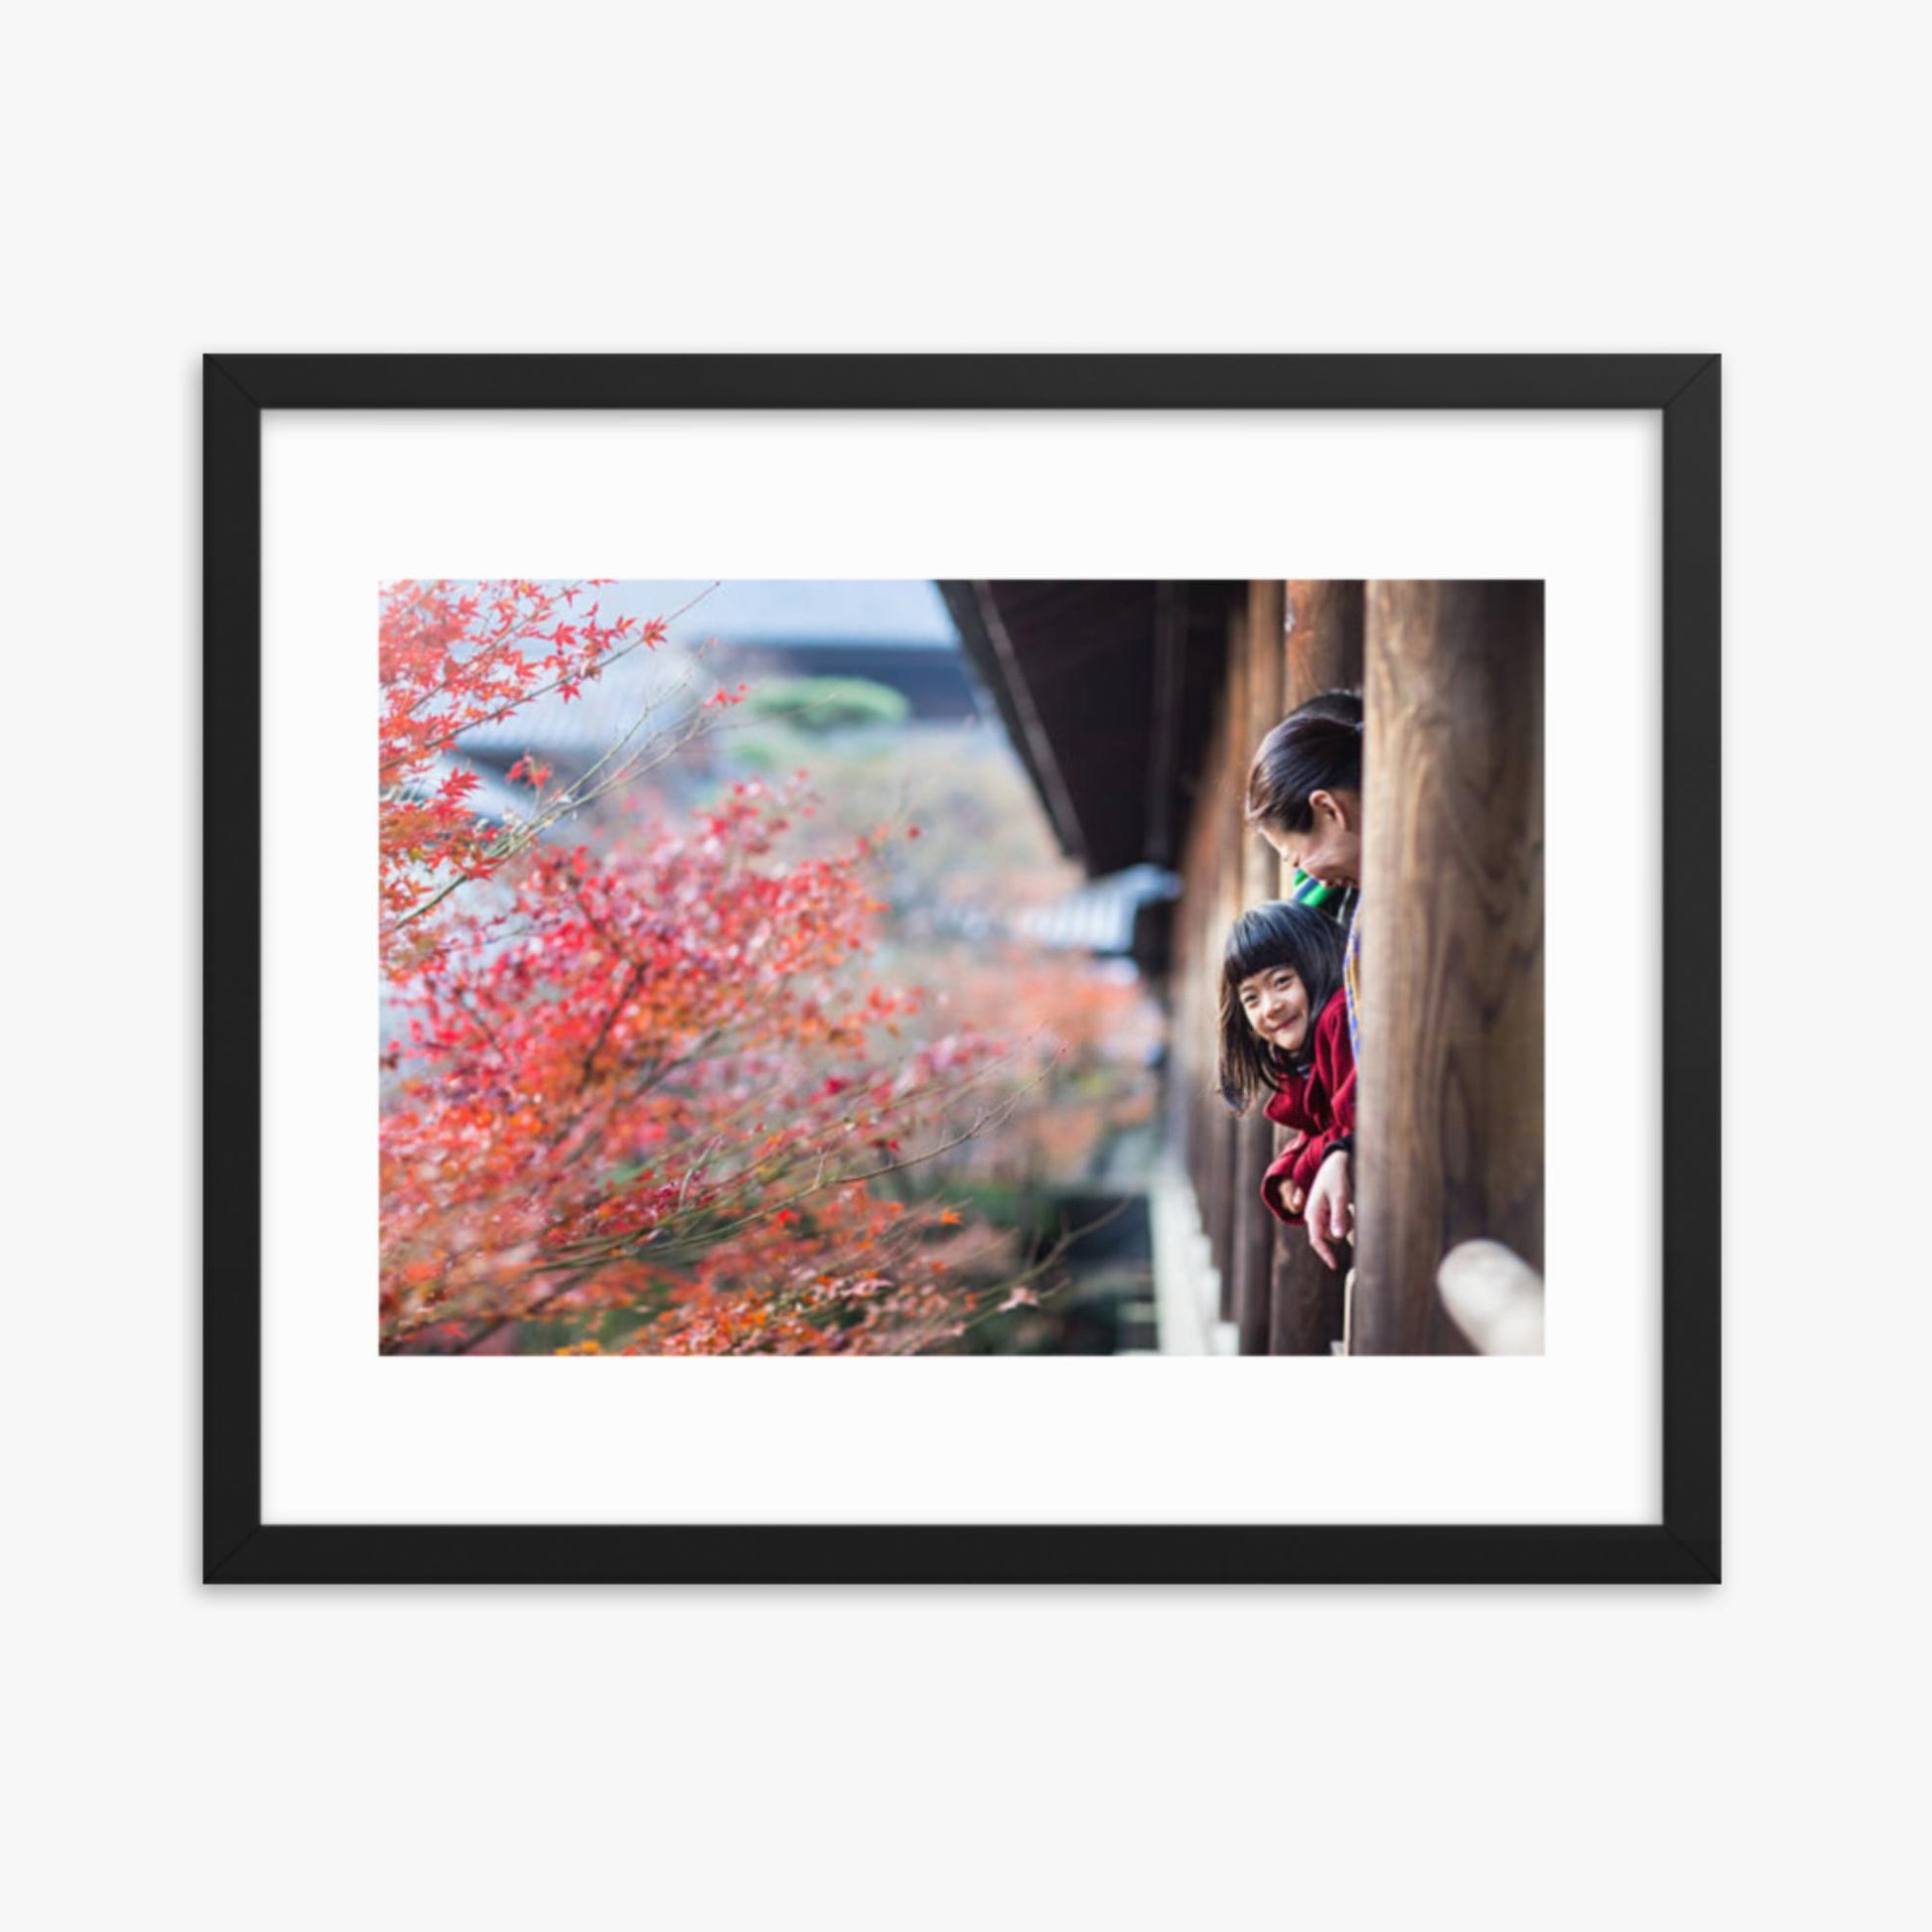 Father, mother and daughter at a temple enjoying autumn leaves 16x20 in Poster With Black Frame